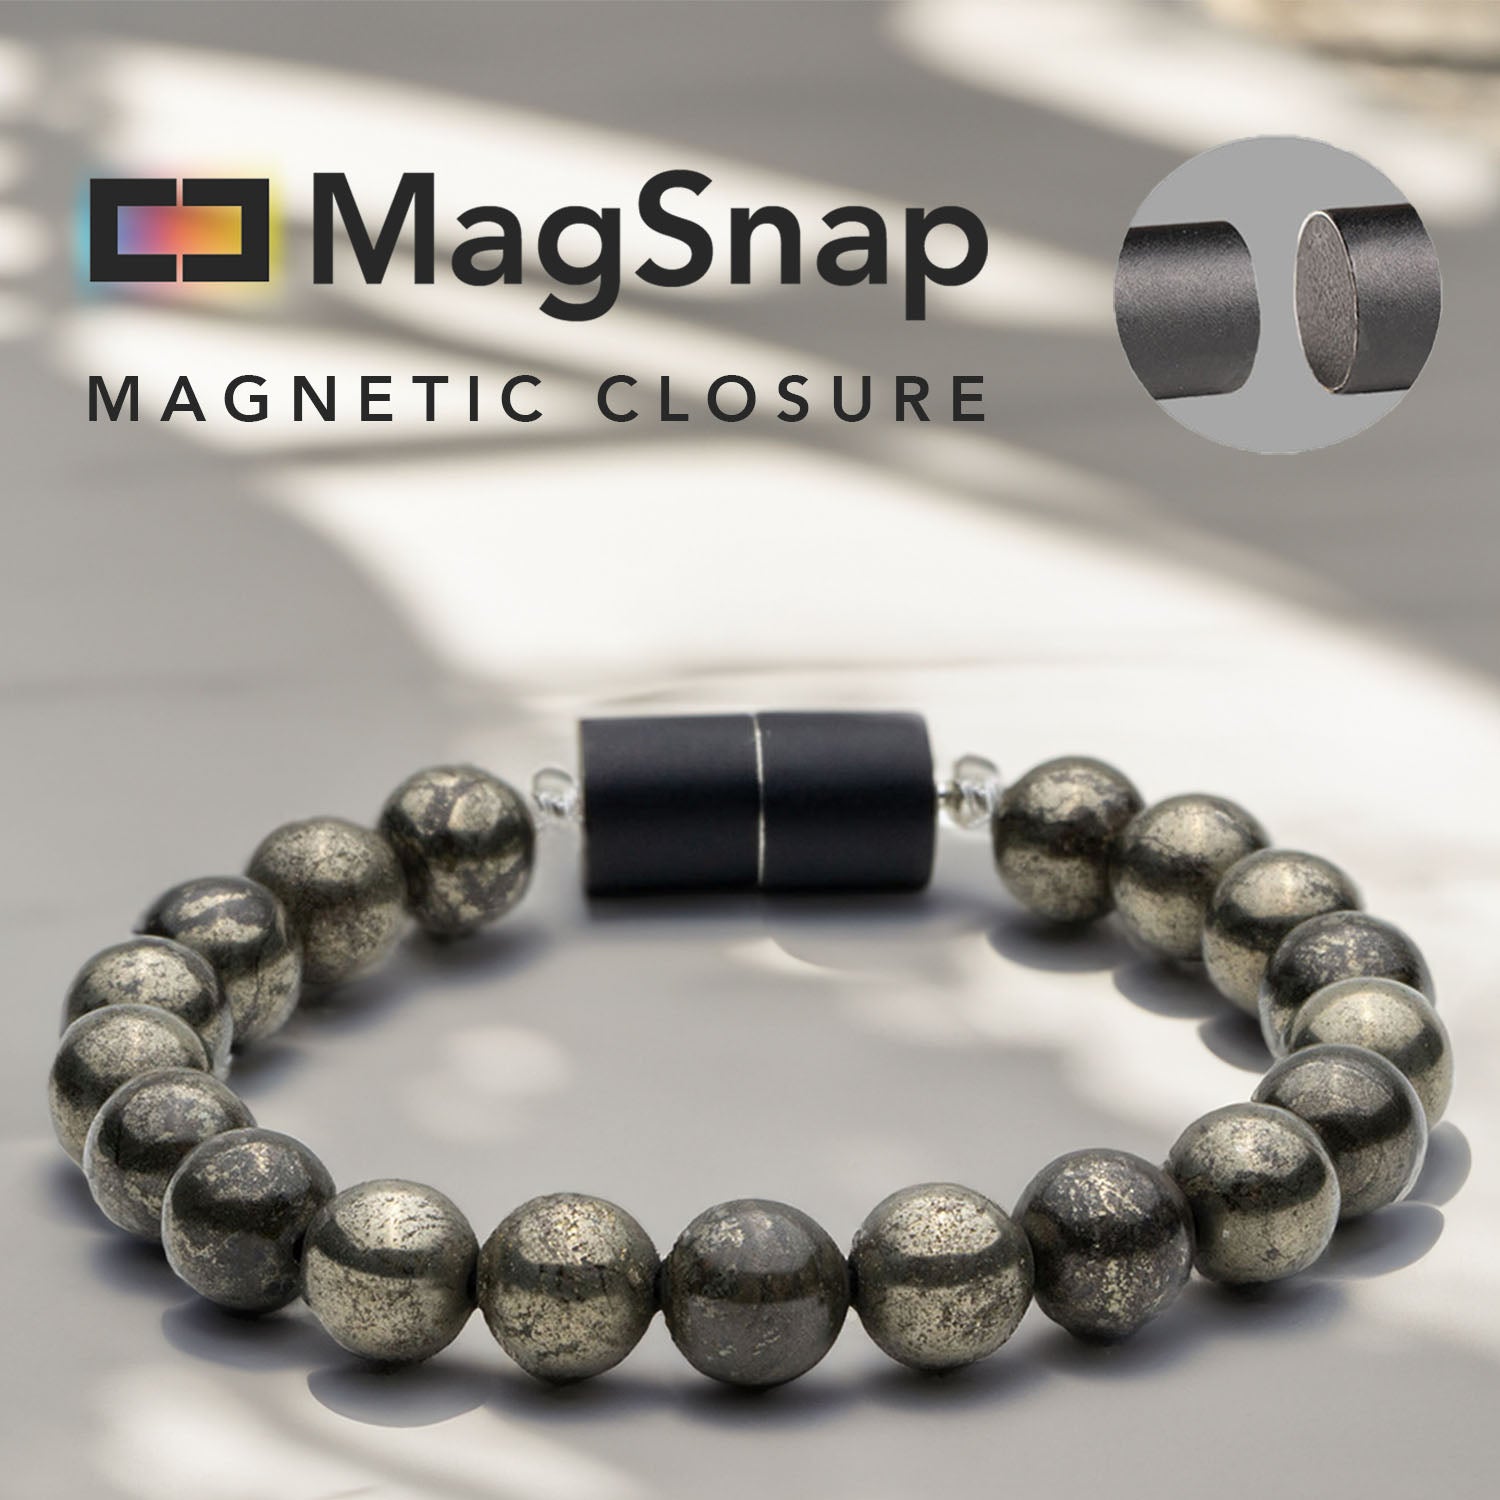 Natural Stone Jewellery Money Magnet Pyrite Natural Stone Bracelet with Magsnap